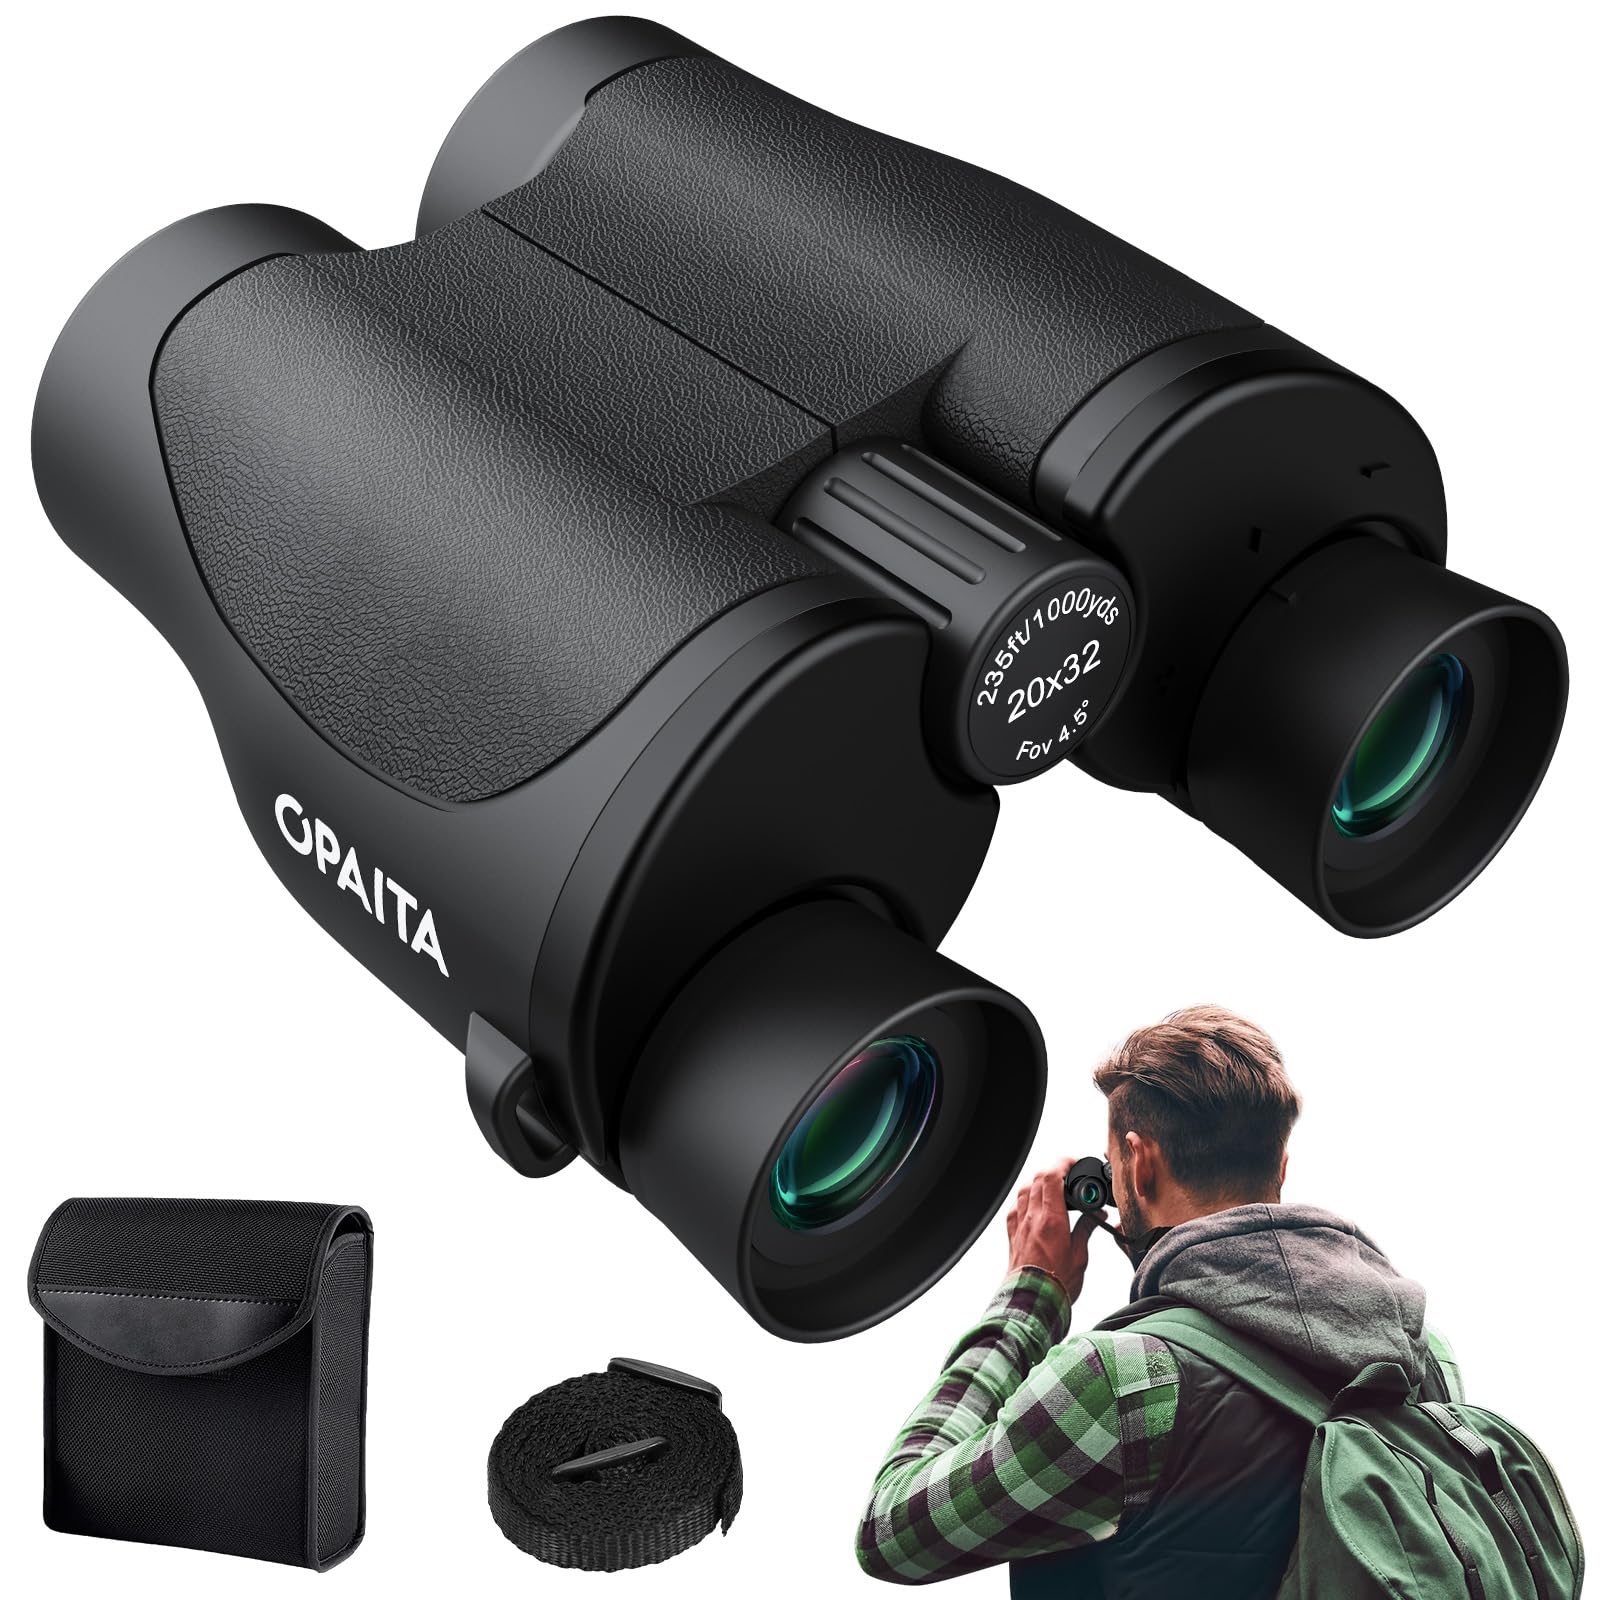 20x32 Binoculars for Adults Kids High Powered with Sharper Vision - Compact Binoculars with Comfortable View - High Definition Small Binocs for Bird Watching Cruise Trip Hunting Travel Concert Hiking